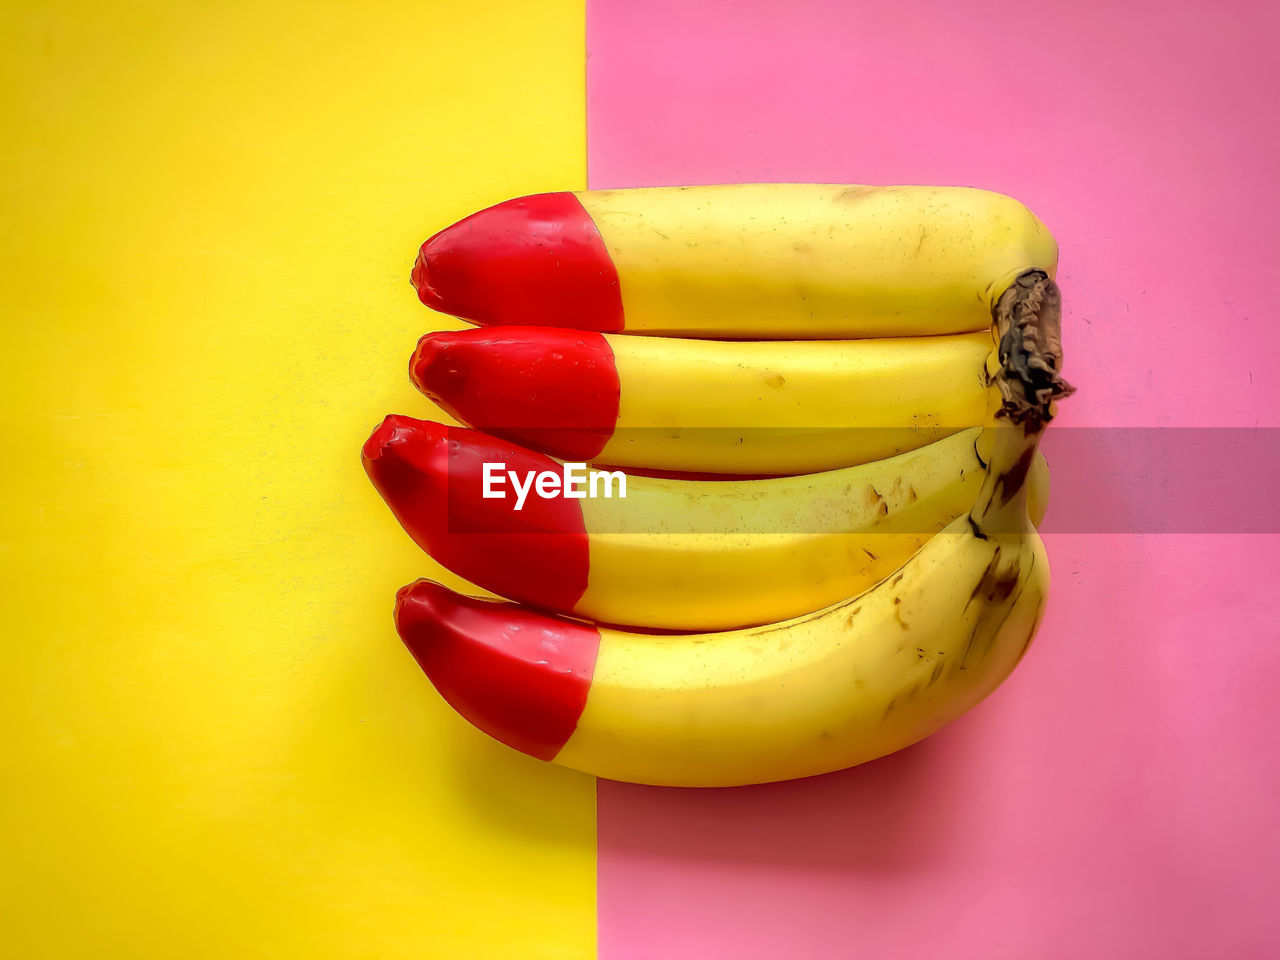 Close-up of red tipped bananas on yellow and pink background.